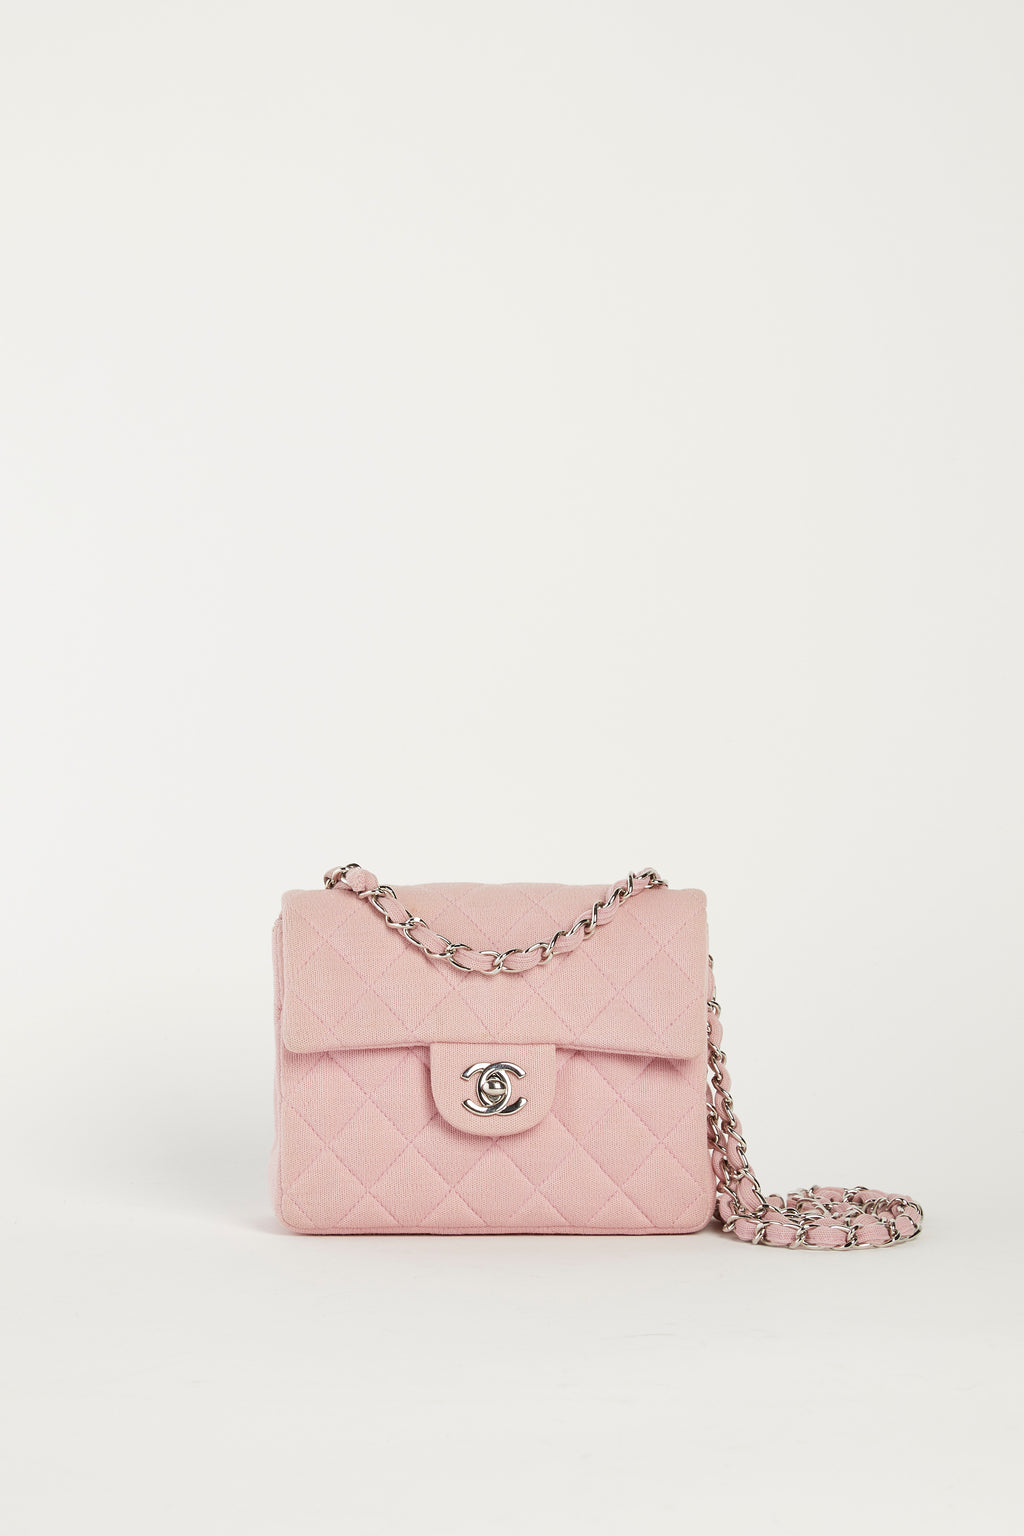 2000s Chanel Pink Jersey Mini Square Flap Bag